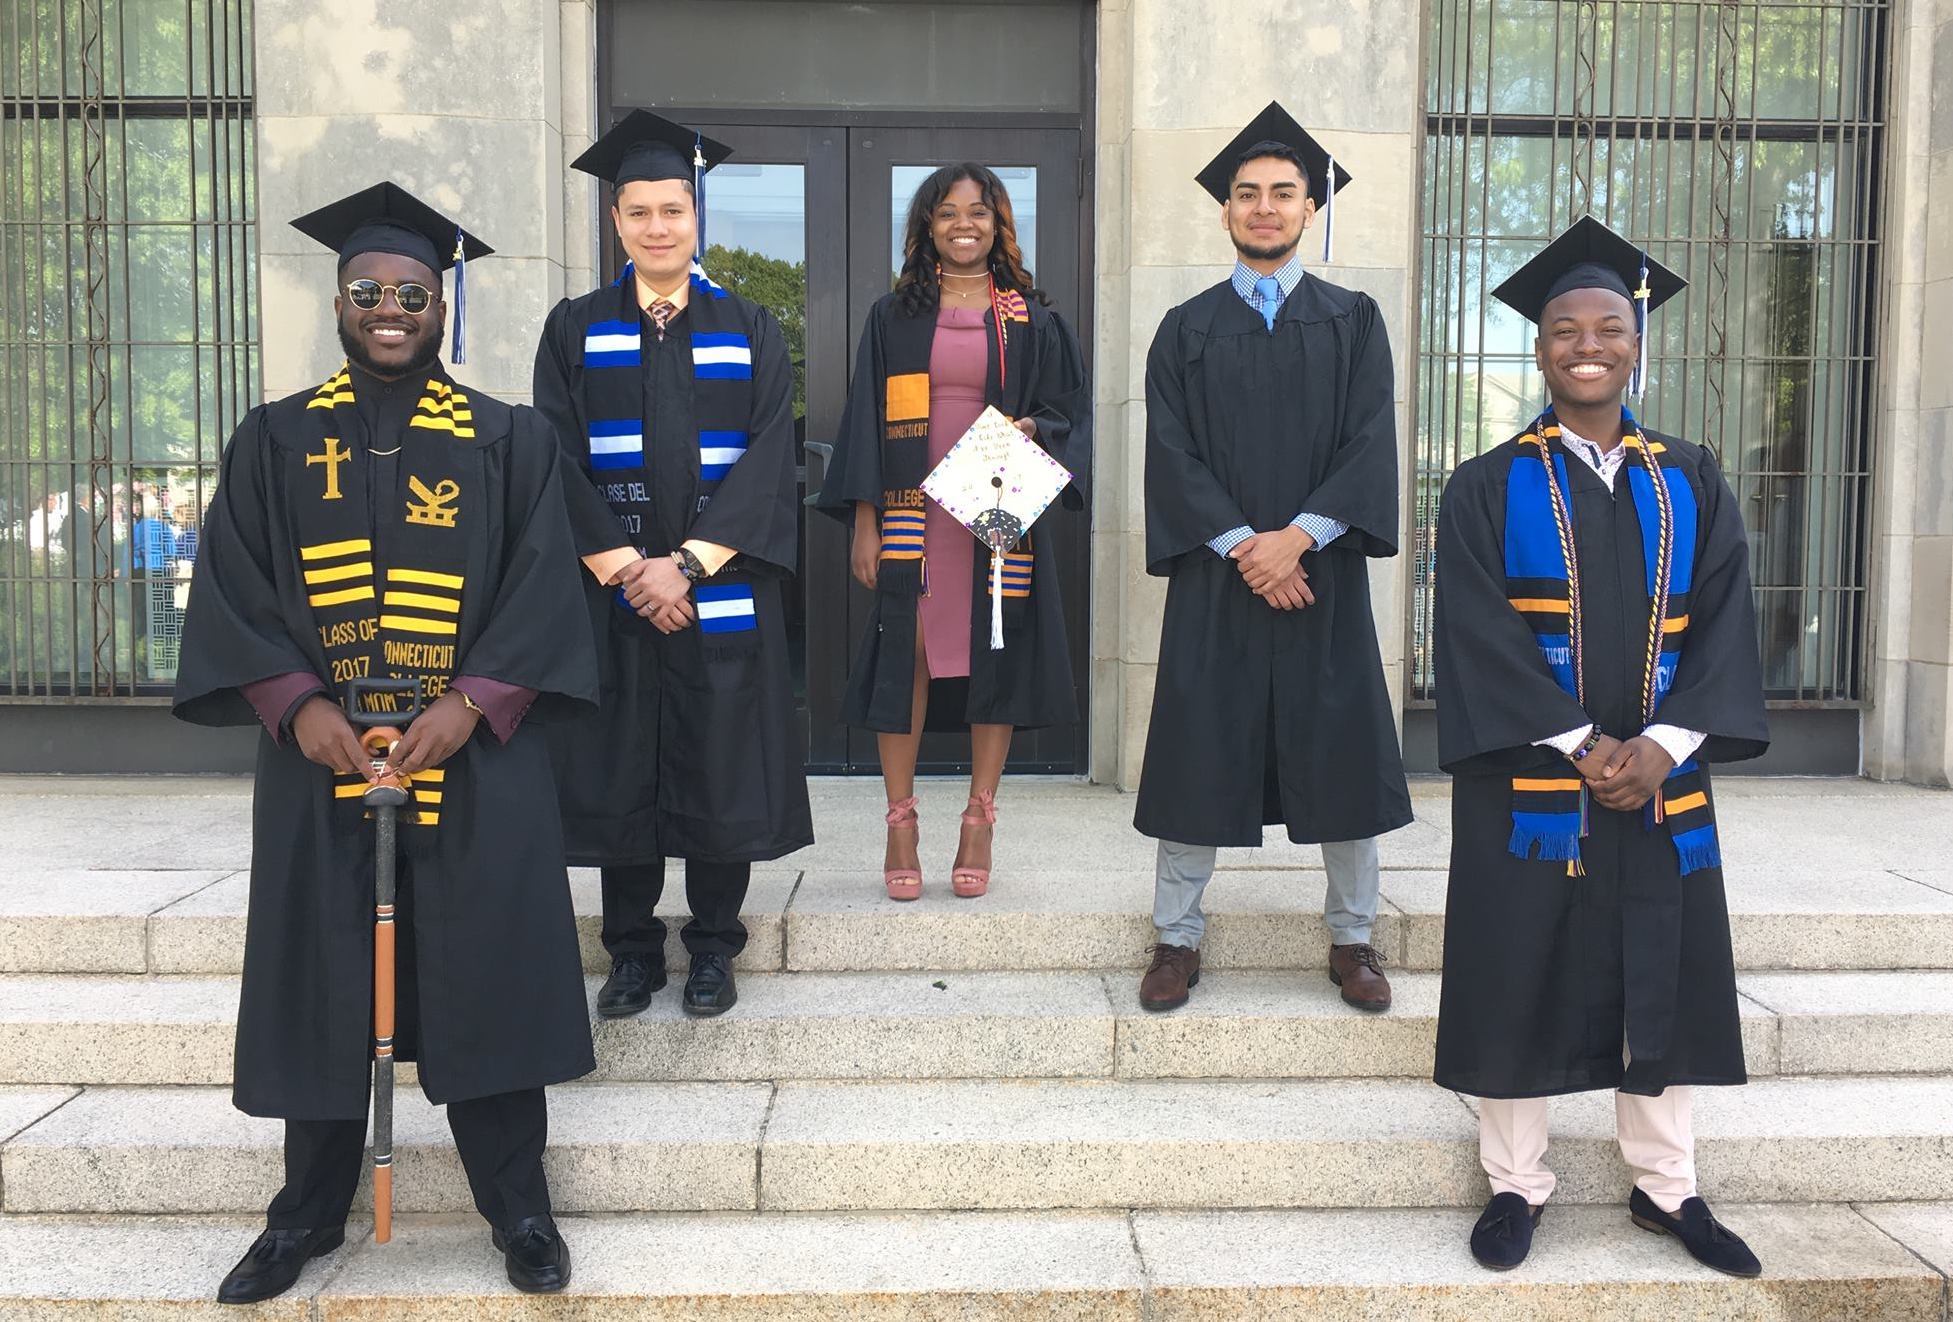 Maurice (left) with fellow Posse Scholars at his Connecticut College graduation in 2017.